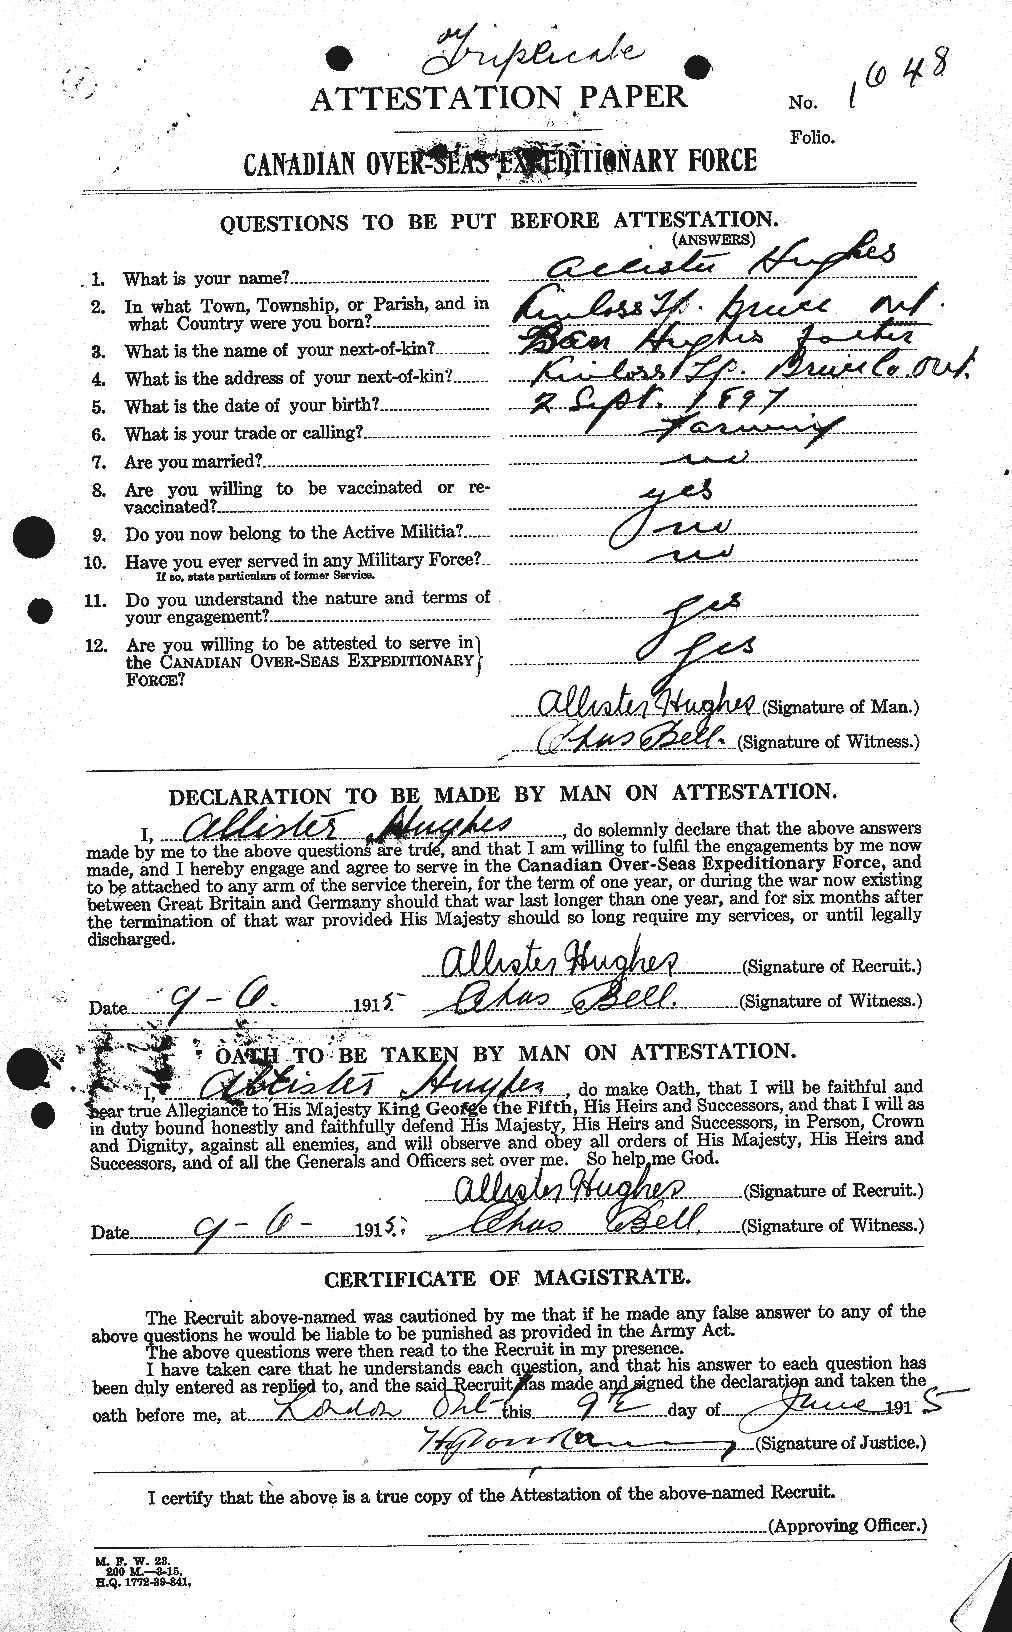 Personnel Records of the First World War - CEF 402547a